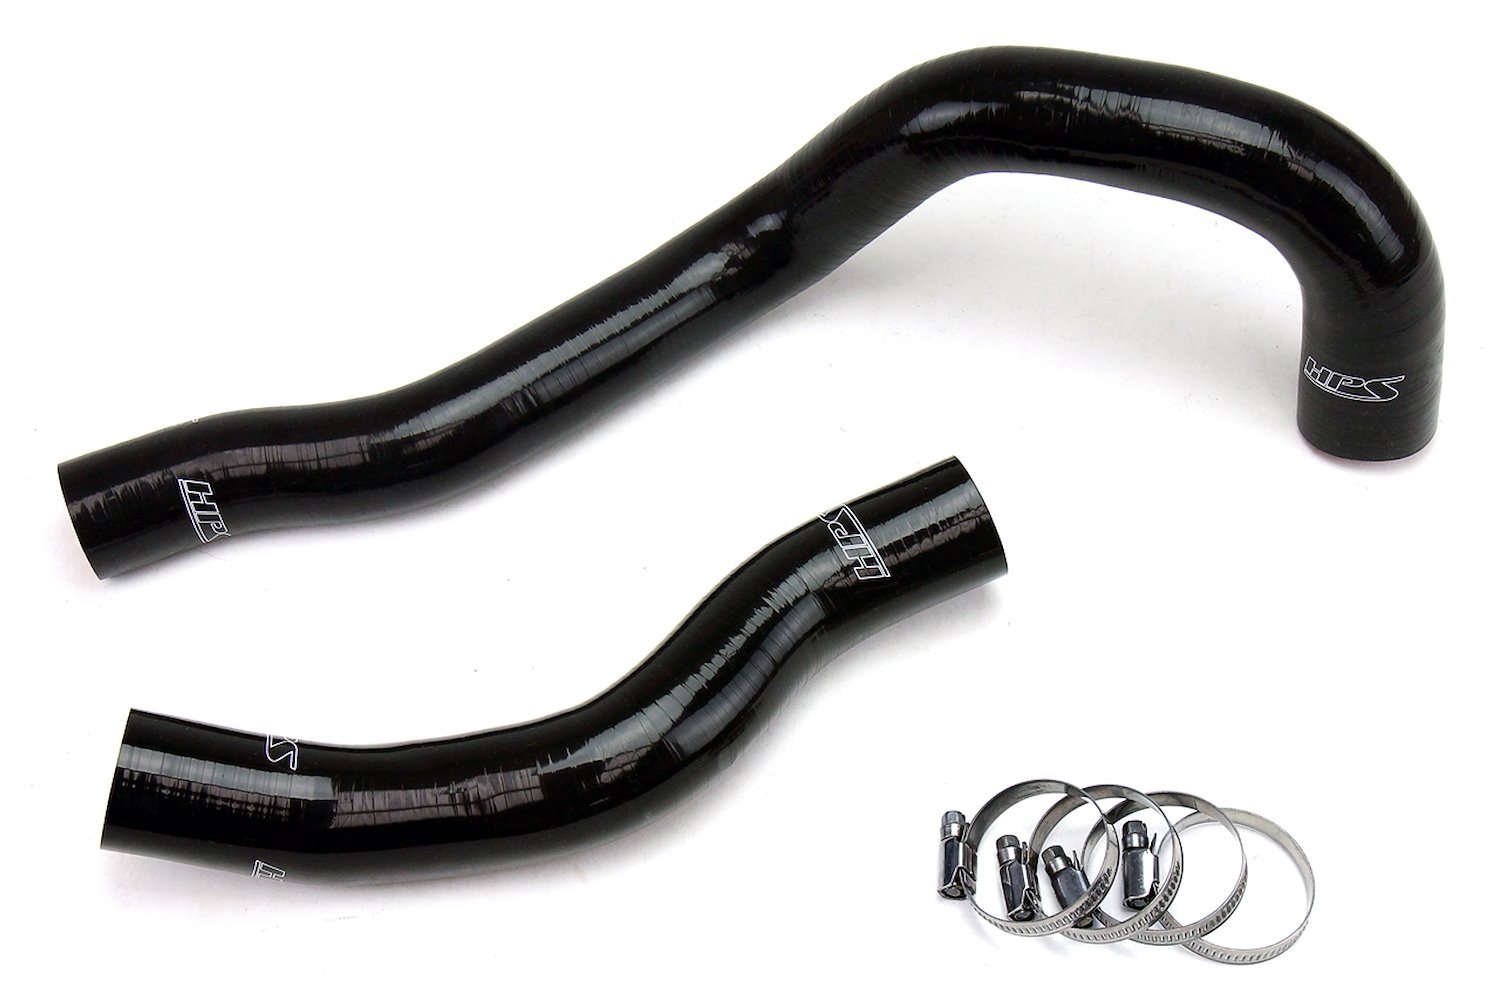 57-1225-BLK Radiator Hose Kit, High-Temp 3-Ply Reinforced Silicone, Replace OEM Rubber Radiator Coolant Hoses